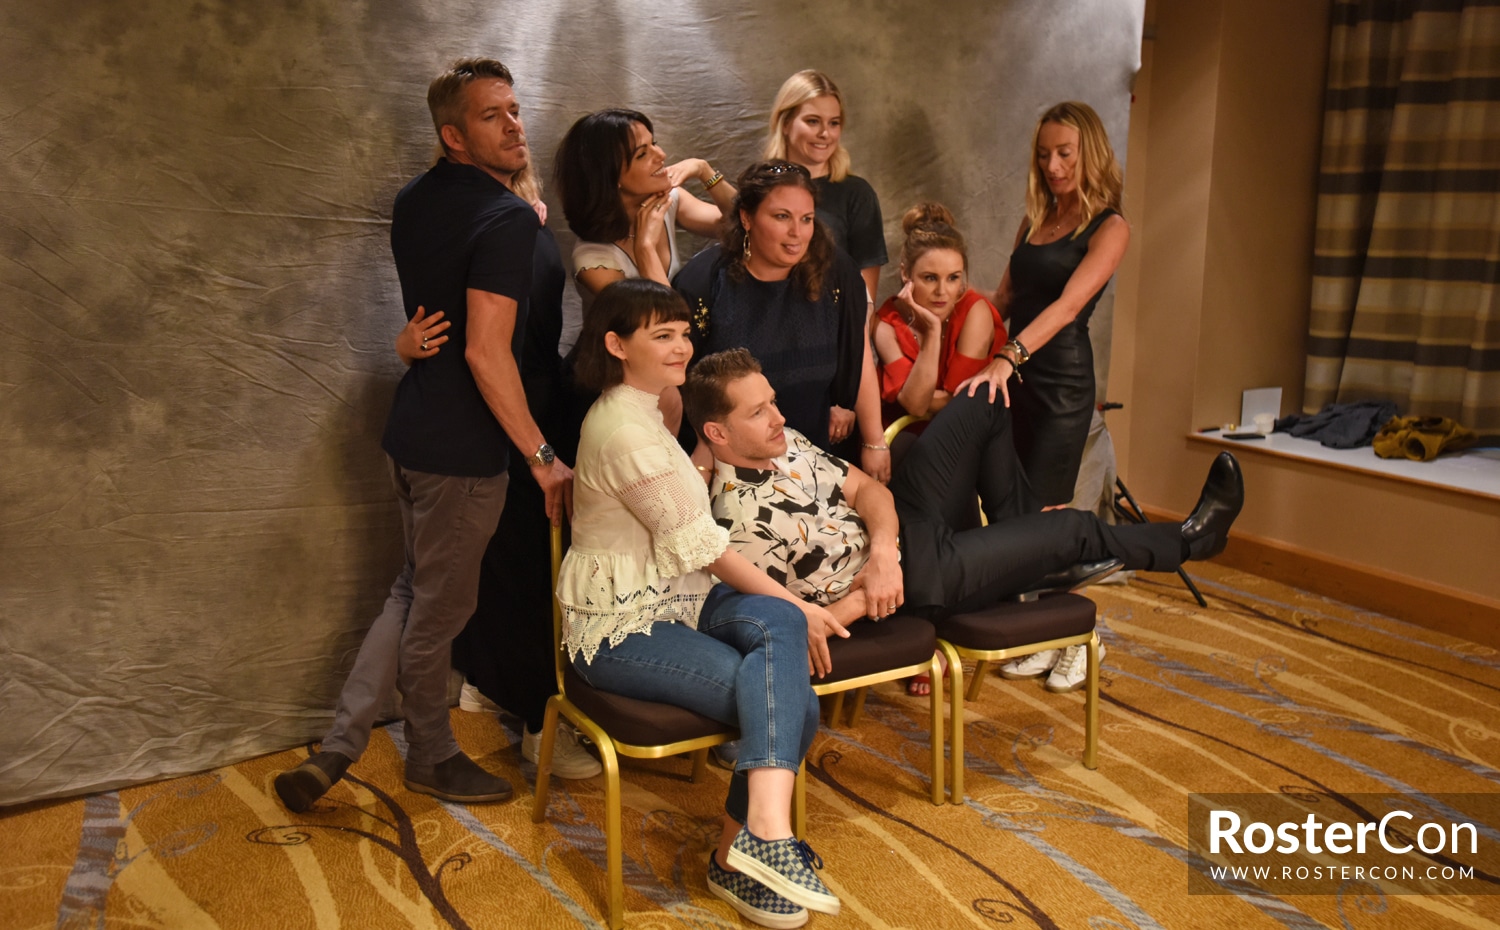 Group Photo - The Happy Ending Convention 3 - Once Upon A Time